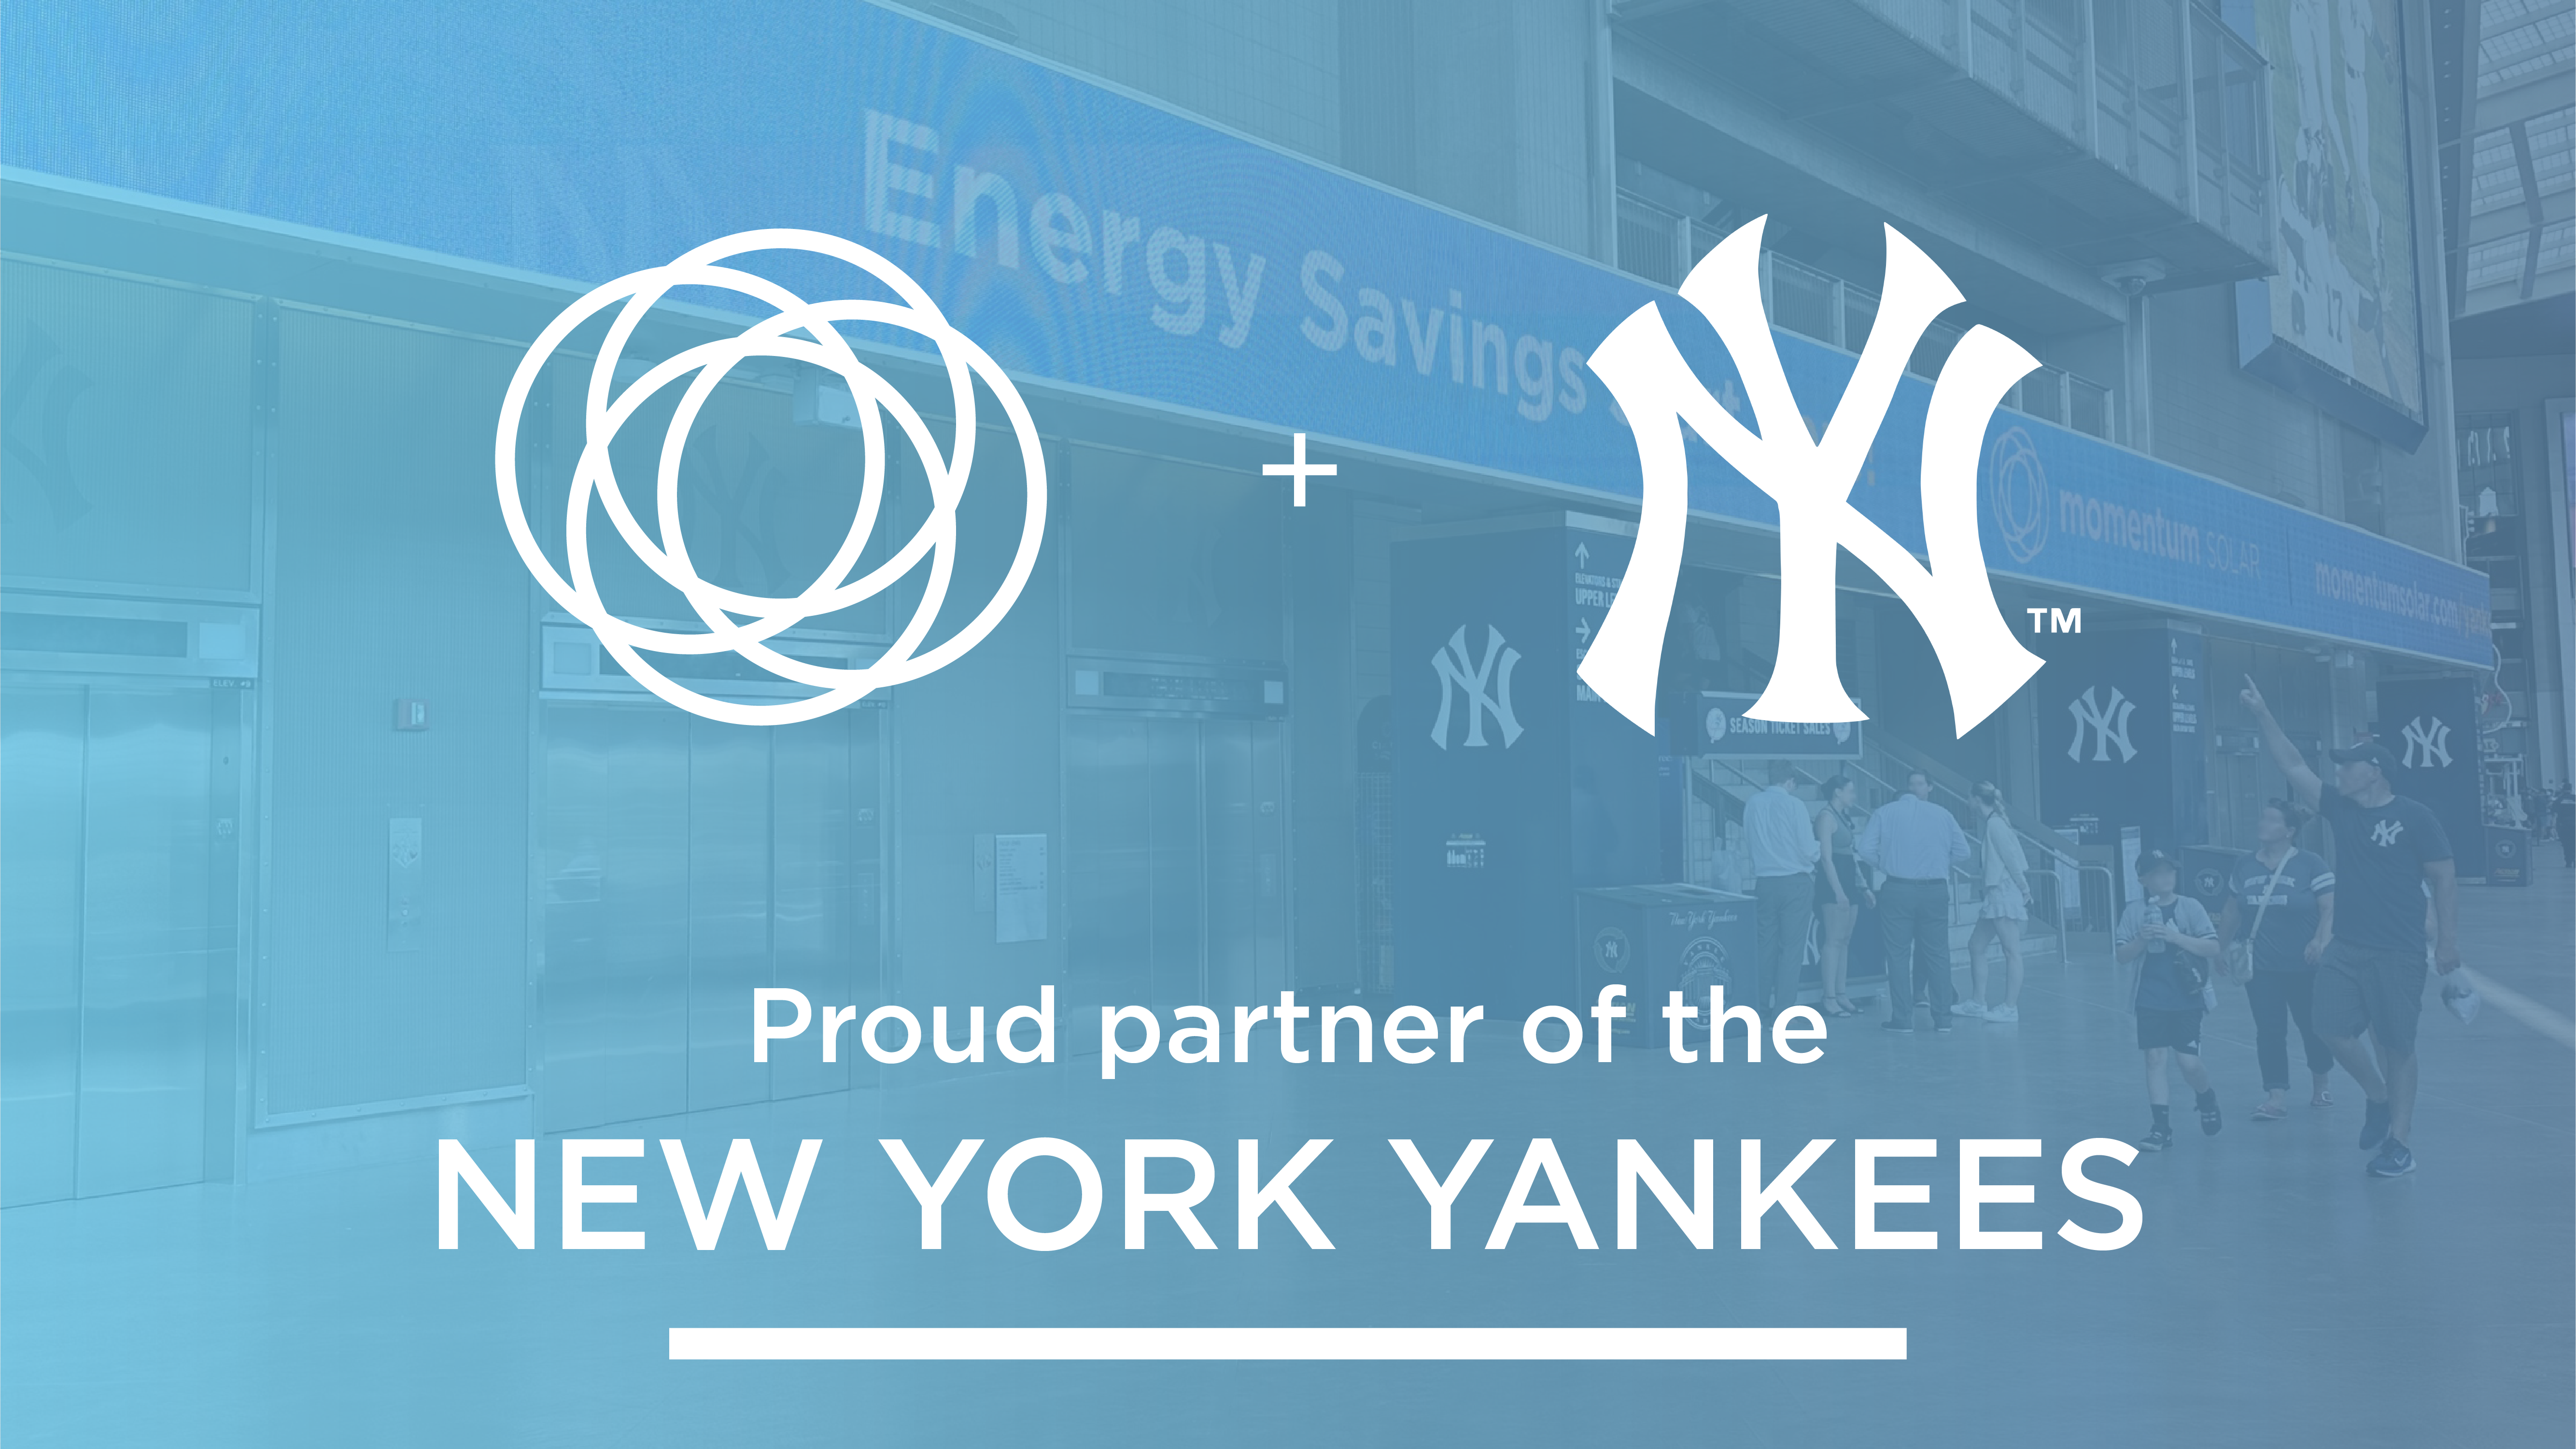 Momentum Solar Announced as a Proud Partner of the New York Yankees